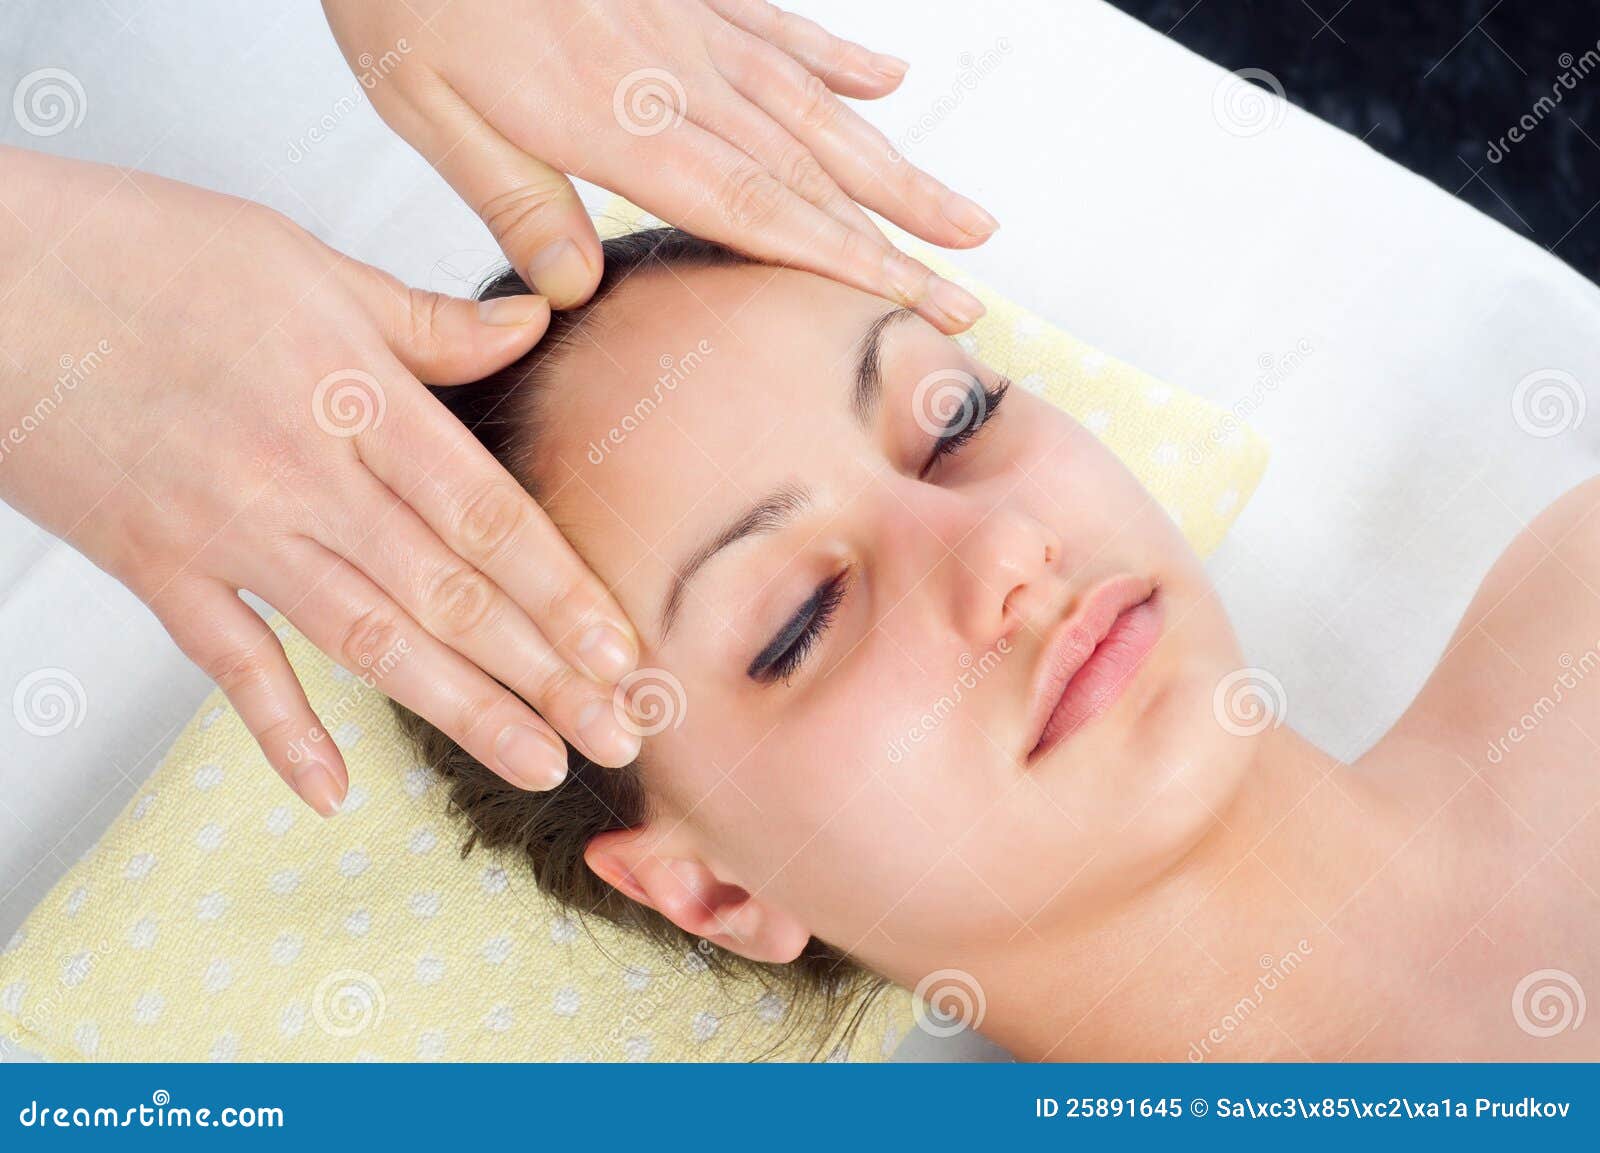 Beautiful Young Women Getting A Face Massage Stock Image Image Of Natural Beautiful 25891645